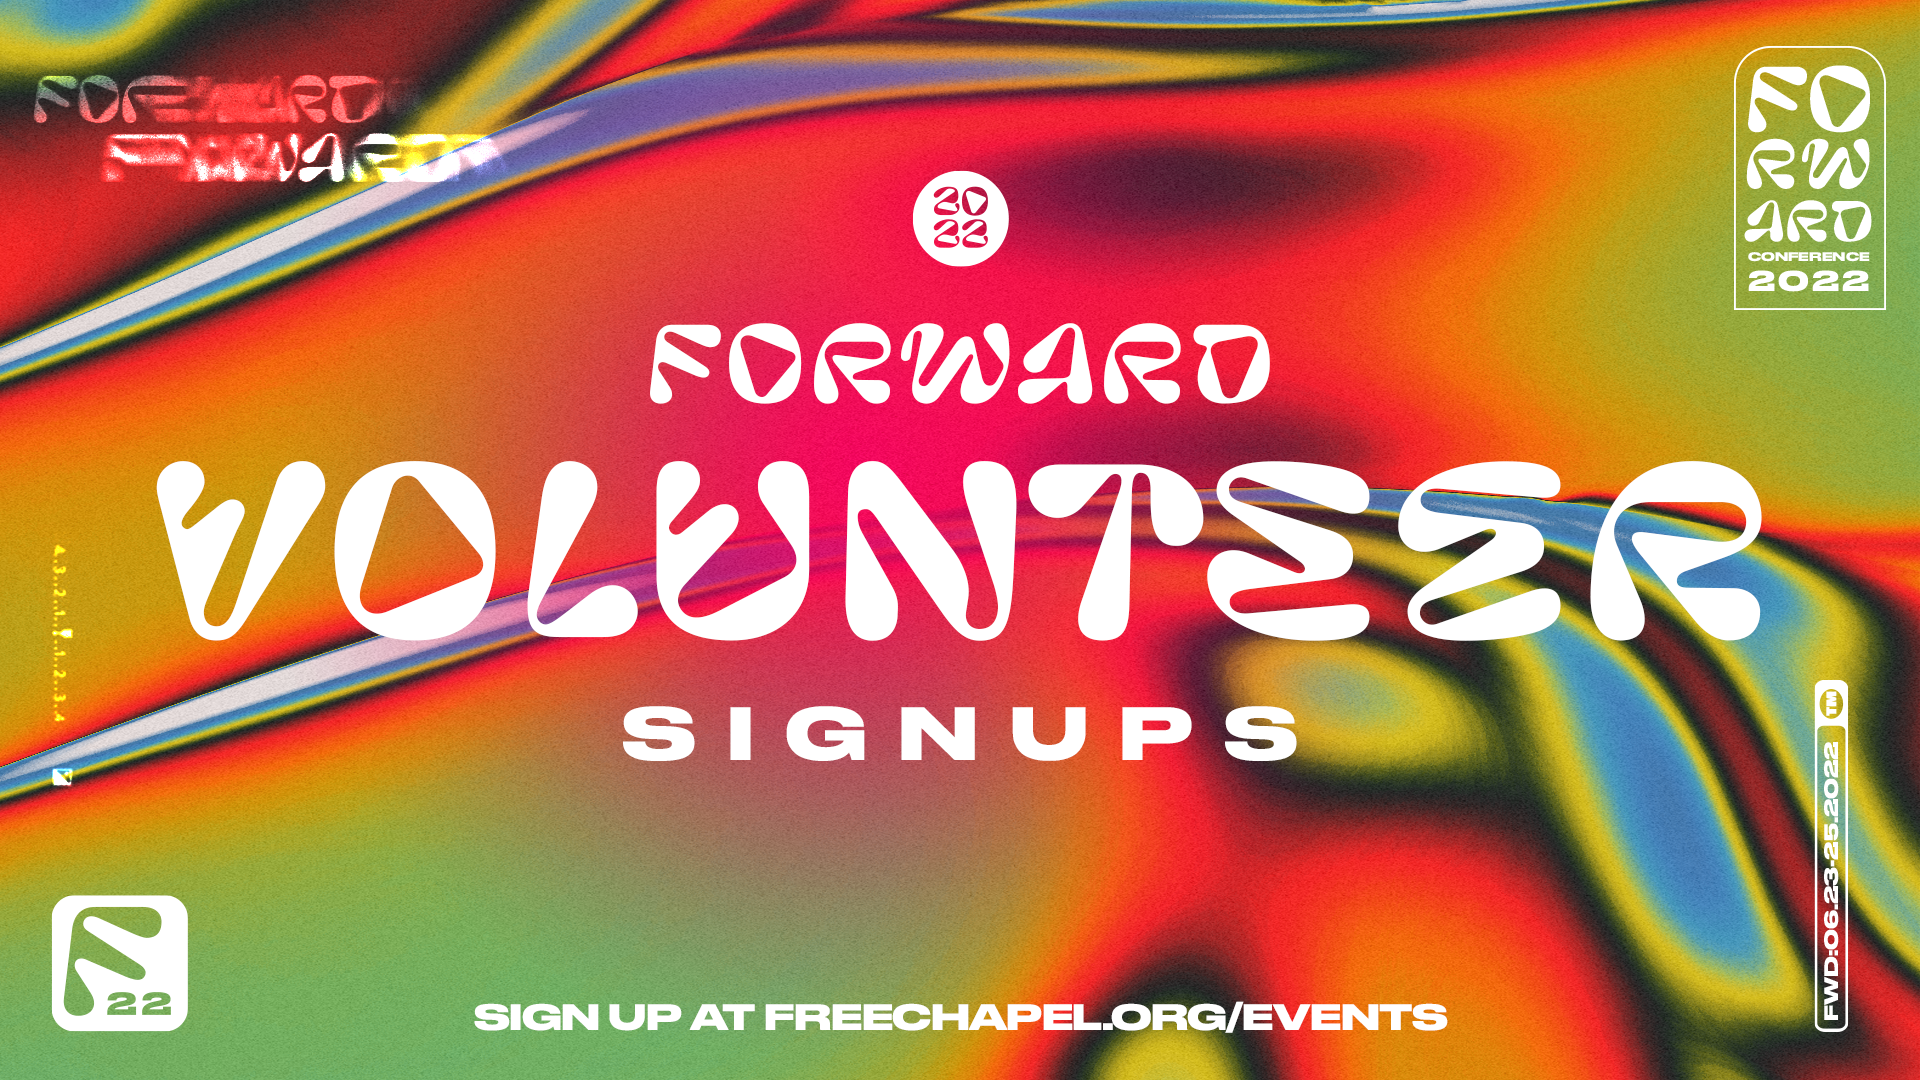 Forward Volunteer Sign Up at the Gainesville campus